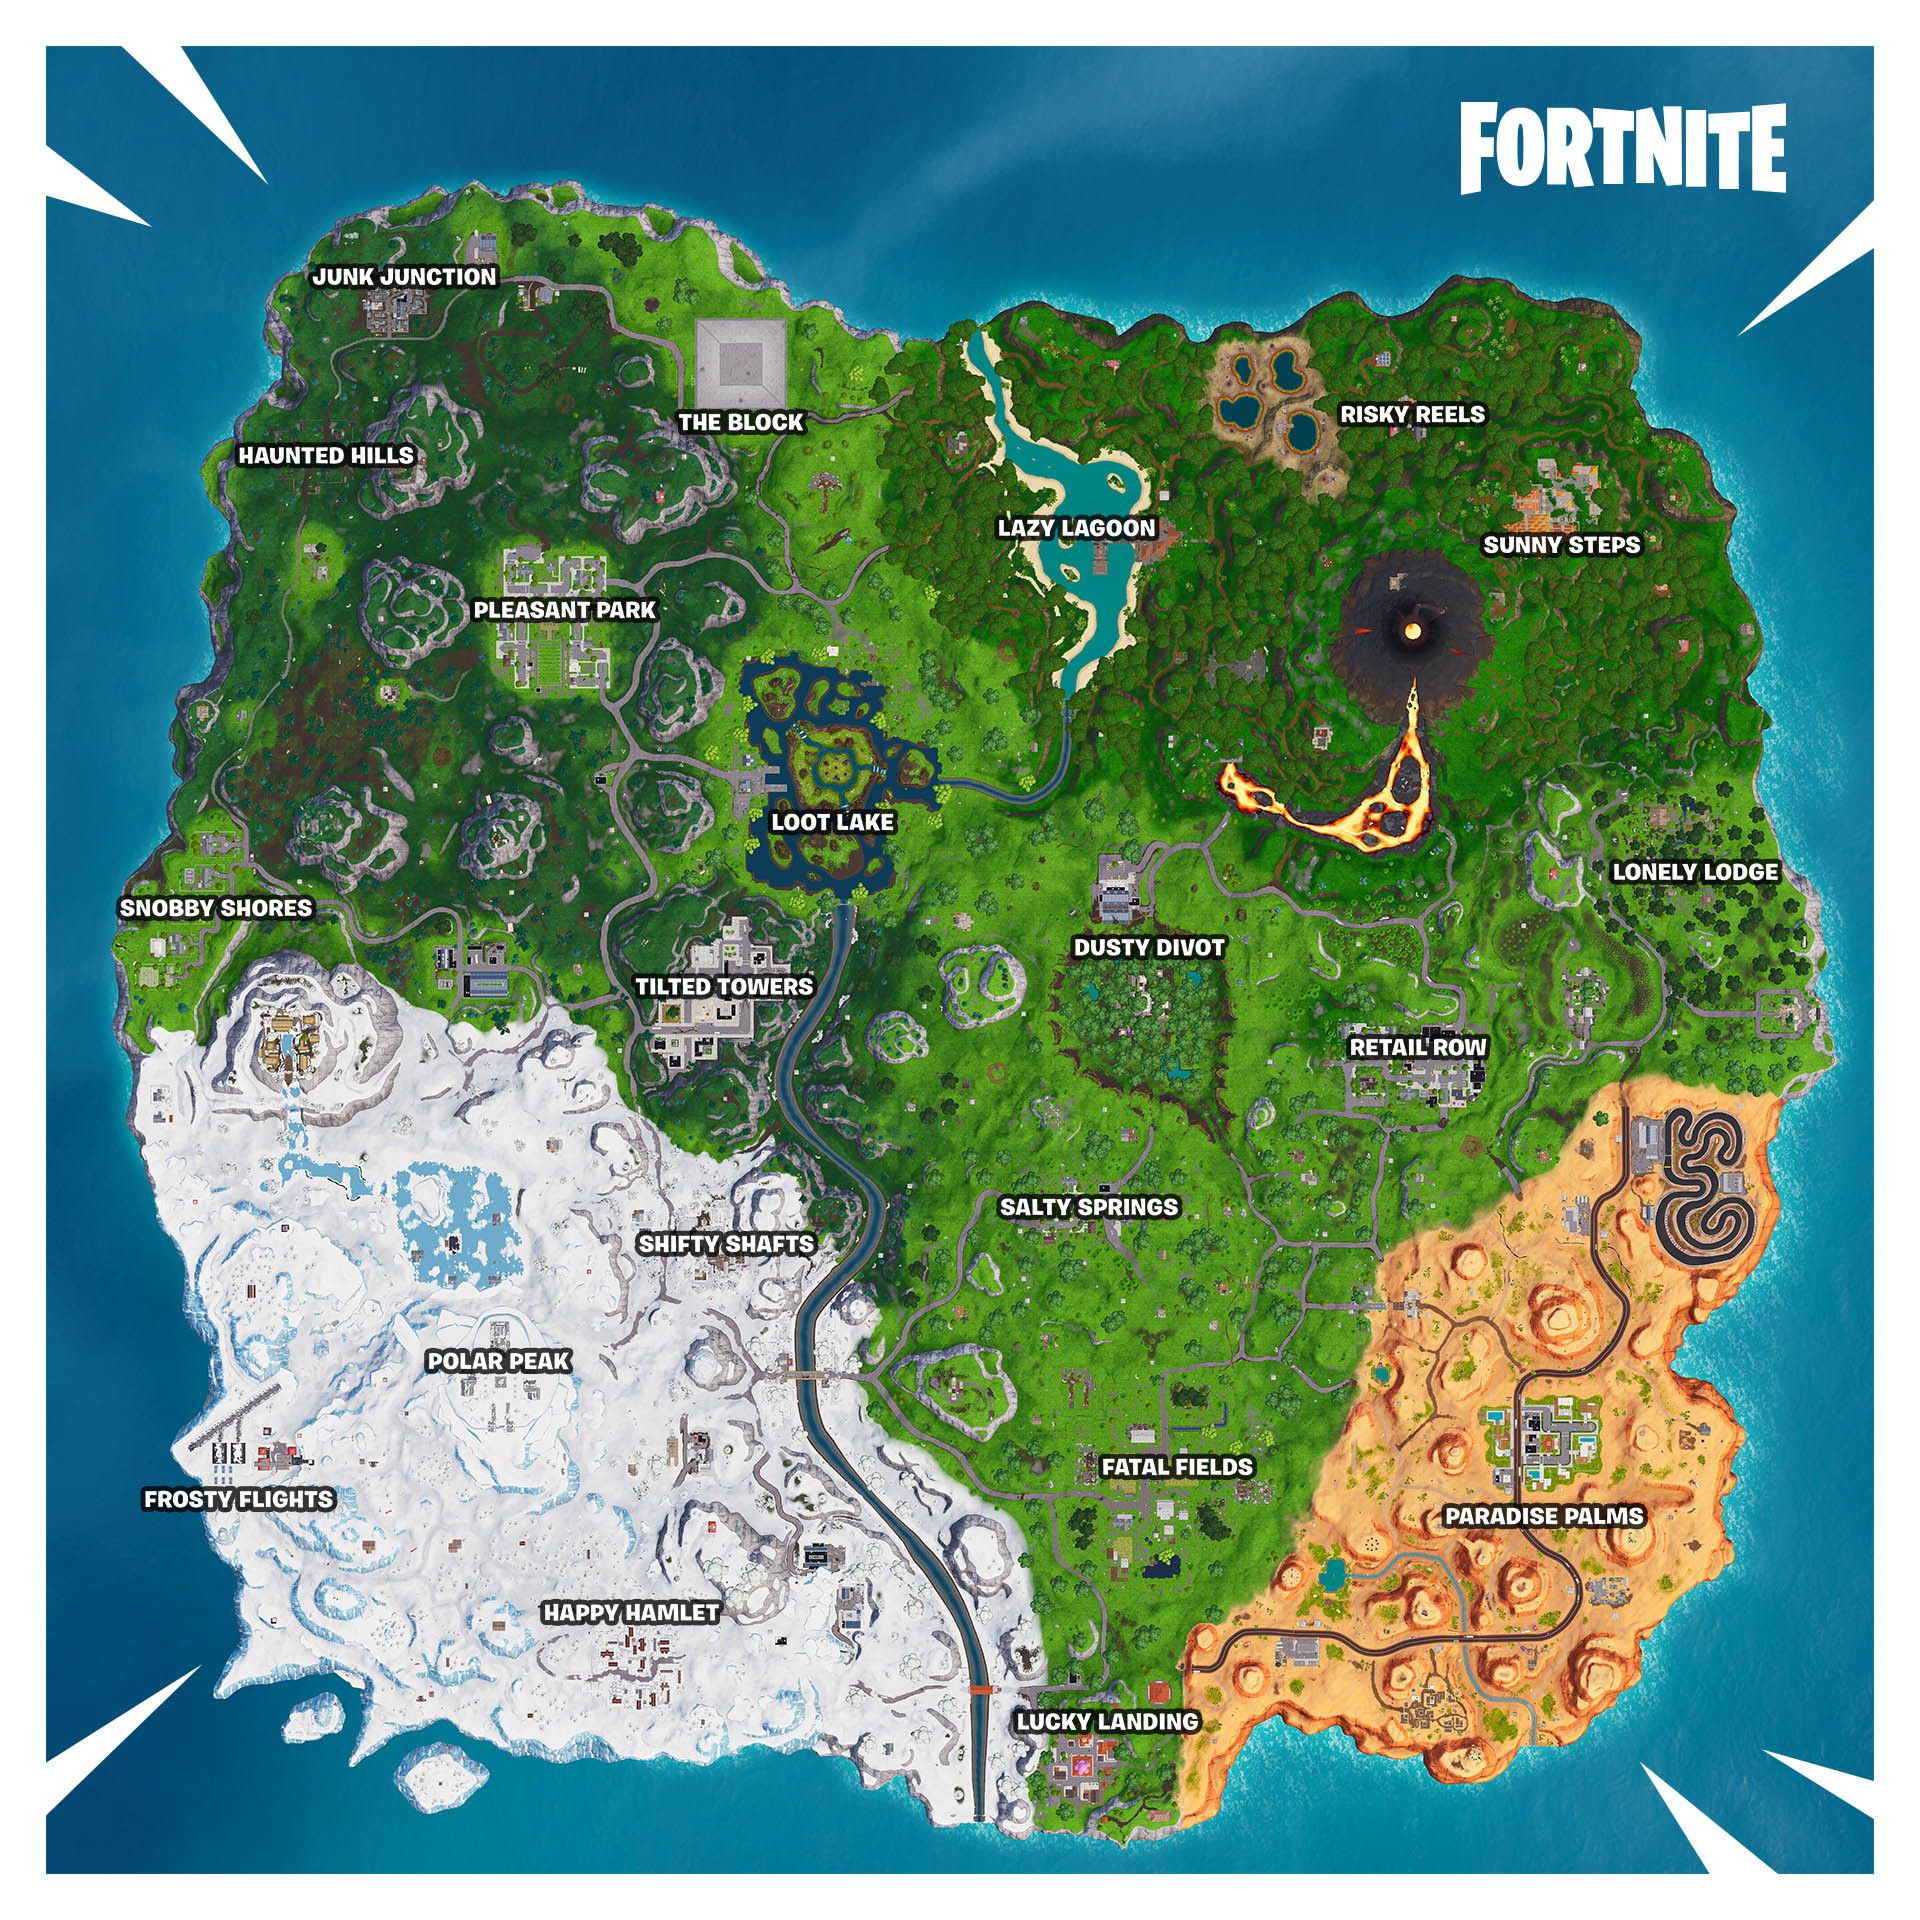 Fortnite Isn't Getting A New Map, But It's Changed The Old One Significantly For Season 8